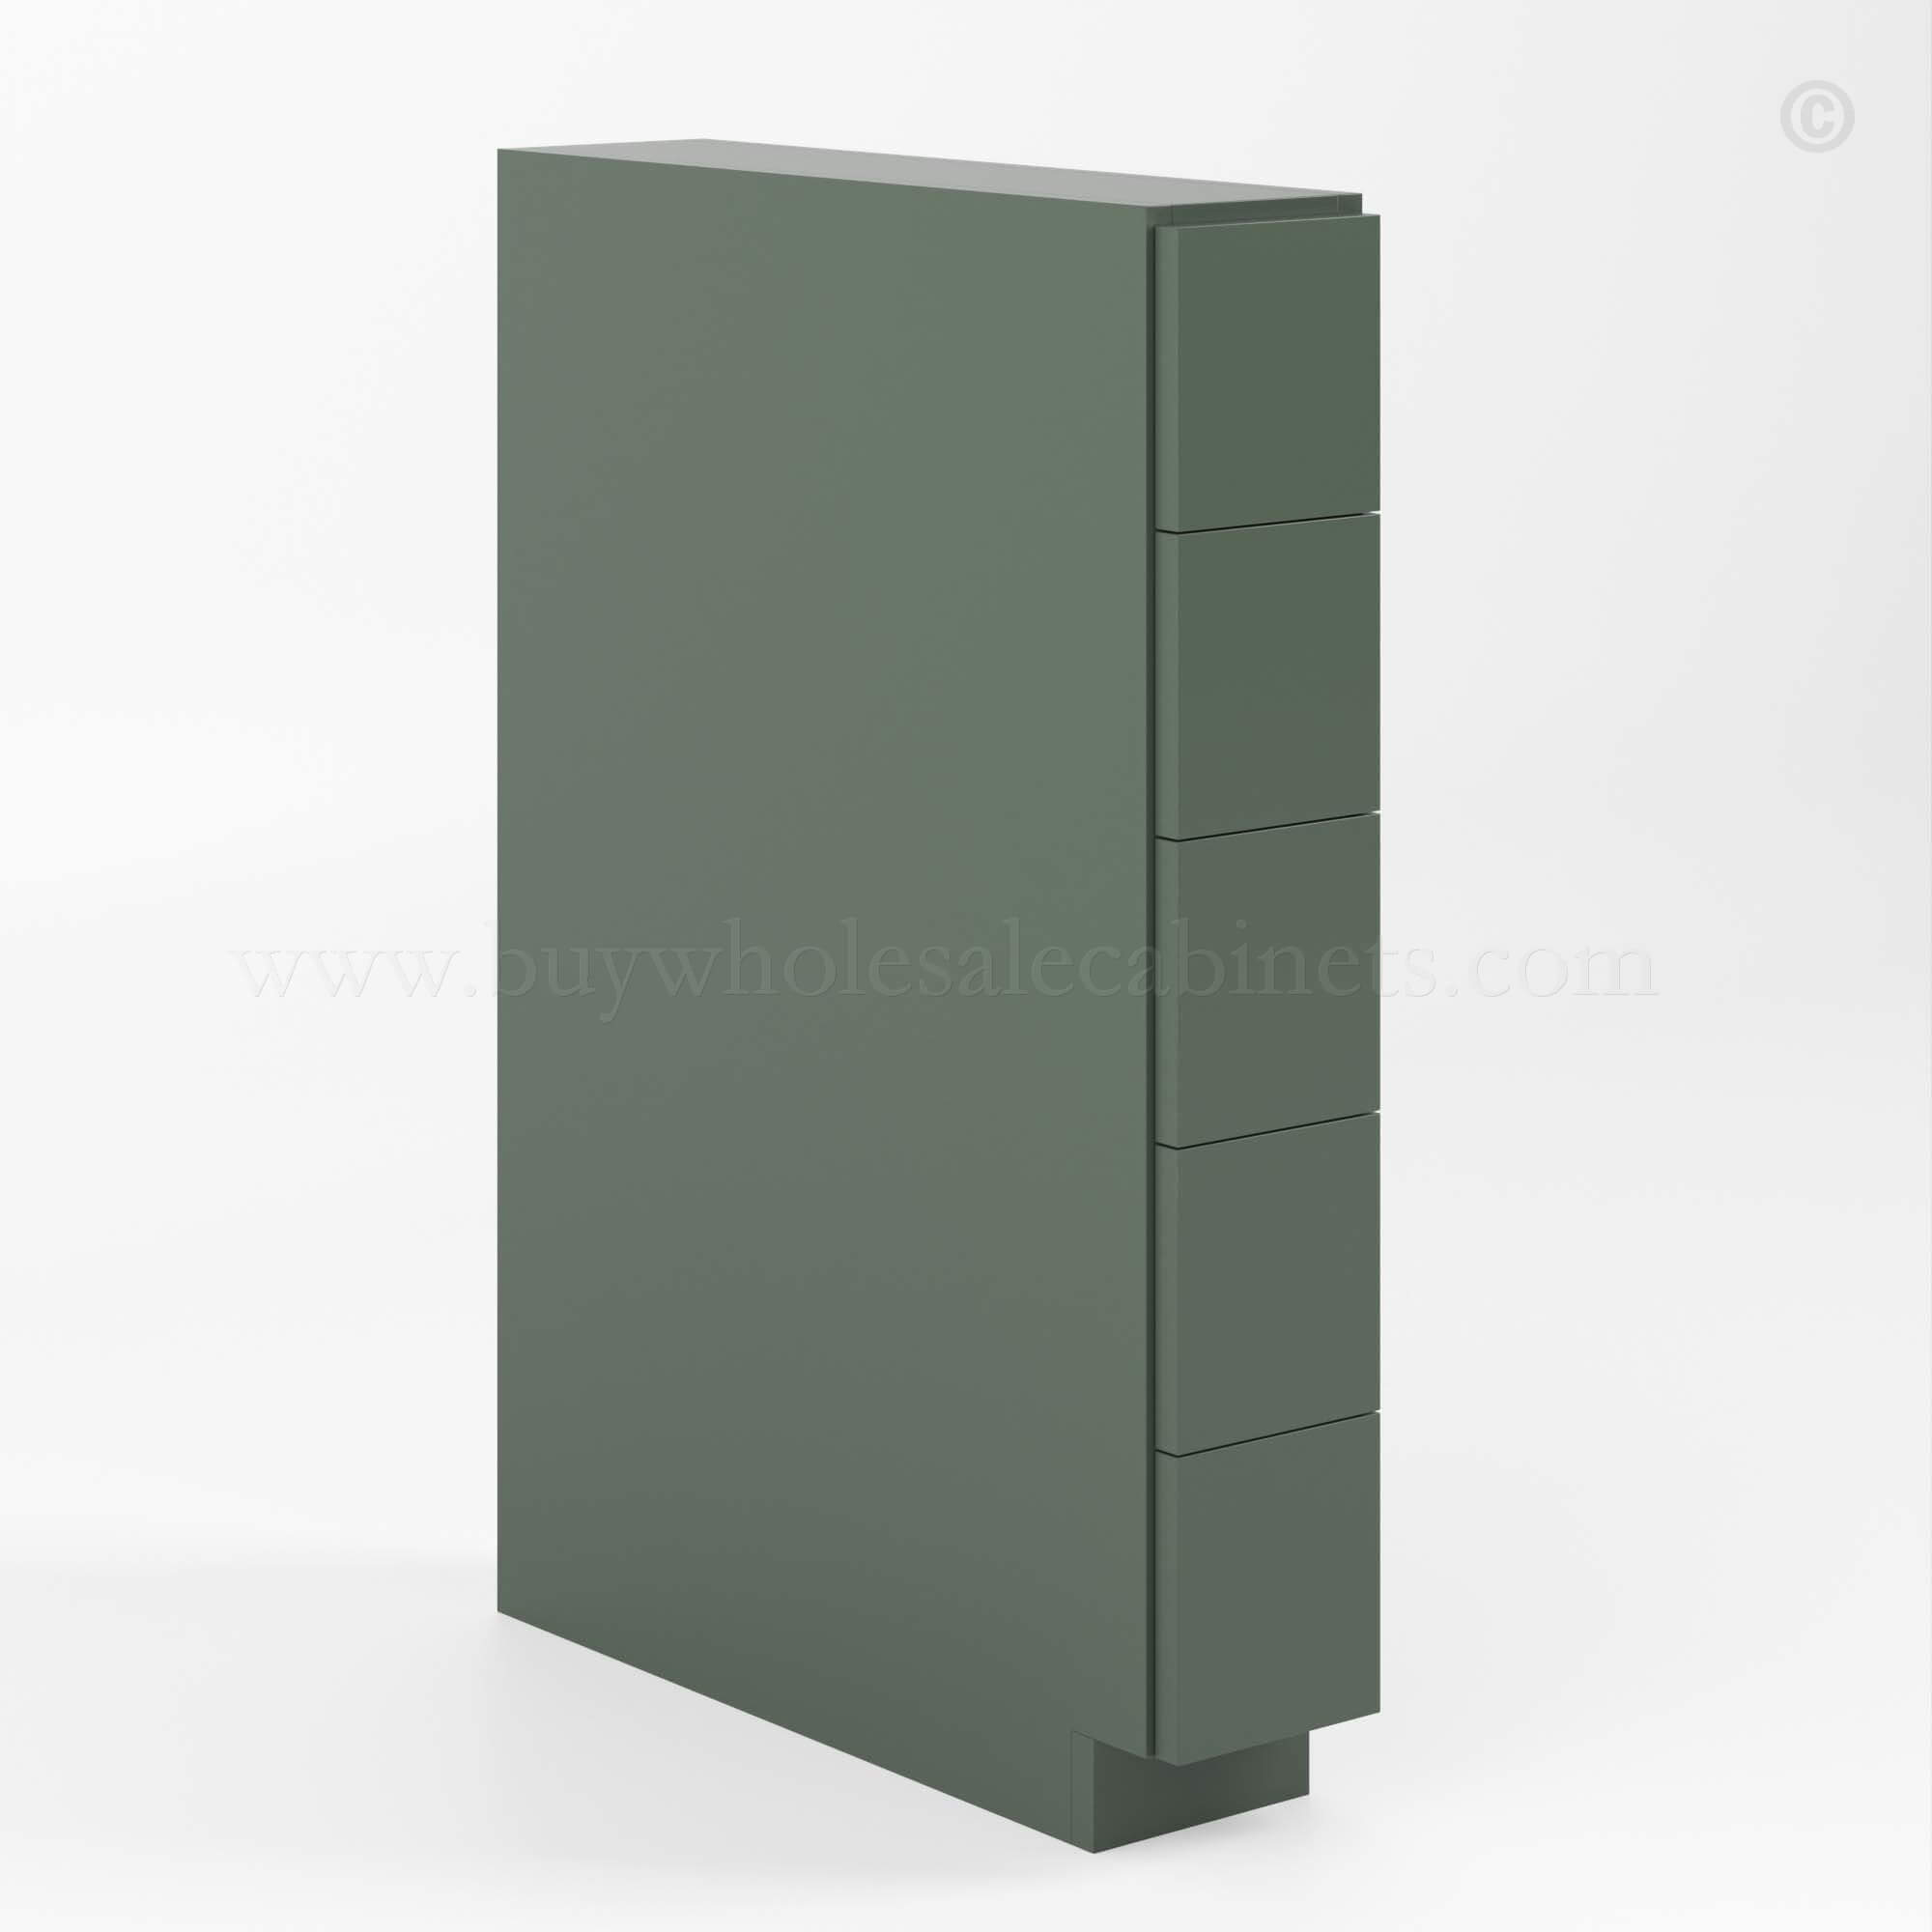 Slim Shaker Green Base Spice Drawers Cabinet, rta cabinets, wholesale cabinets